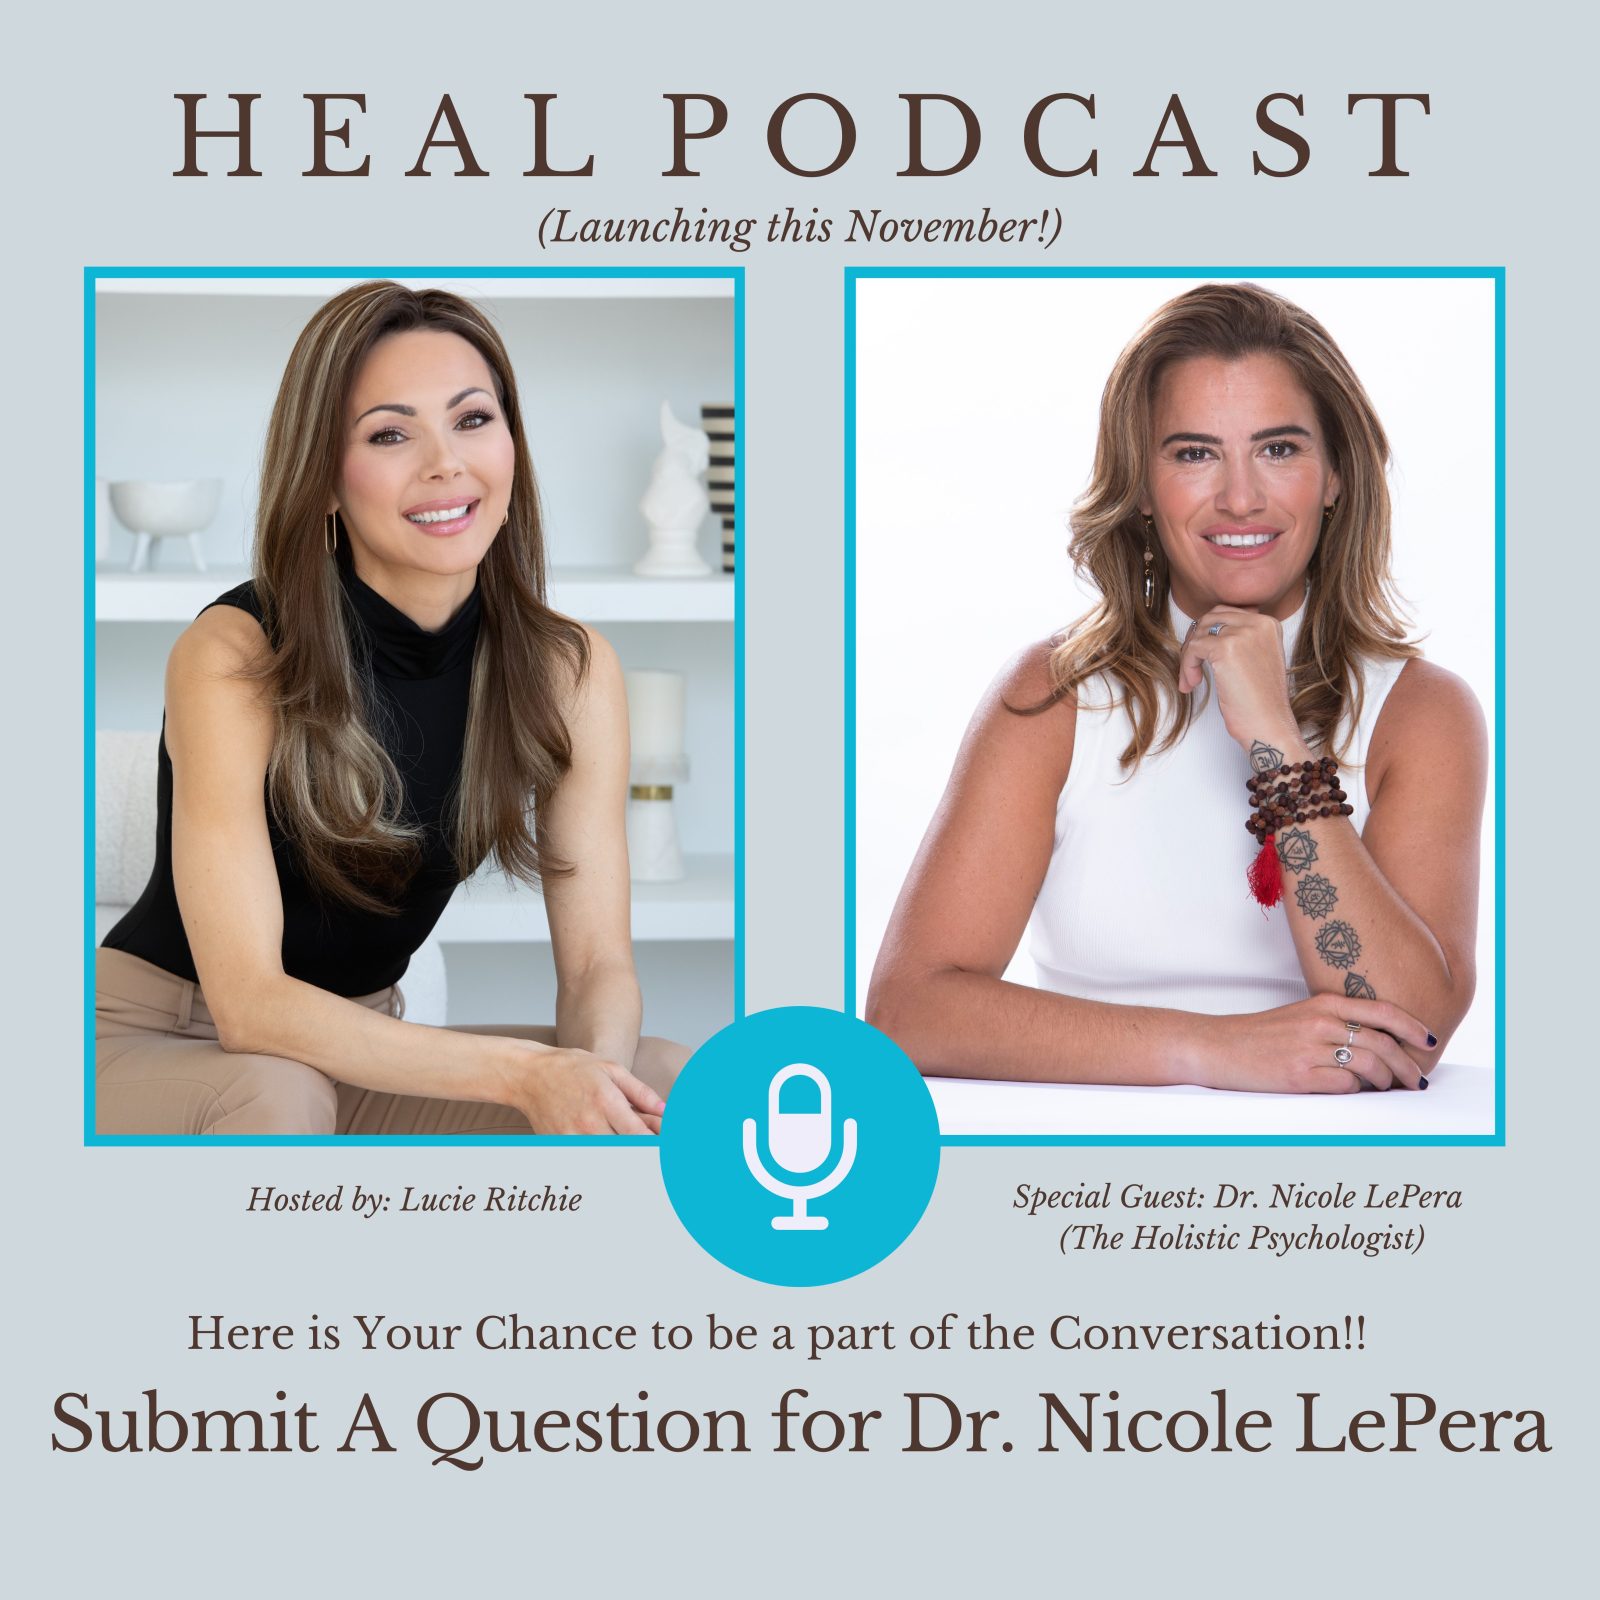 The Holistic Psychologist, Nicole LePera, sits with Trauma Expert, Lucie Ritchie for an interview on Heal Podcast. www.healpodcast.com